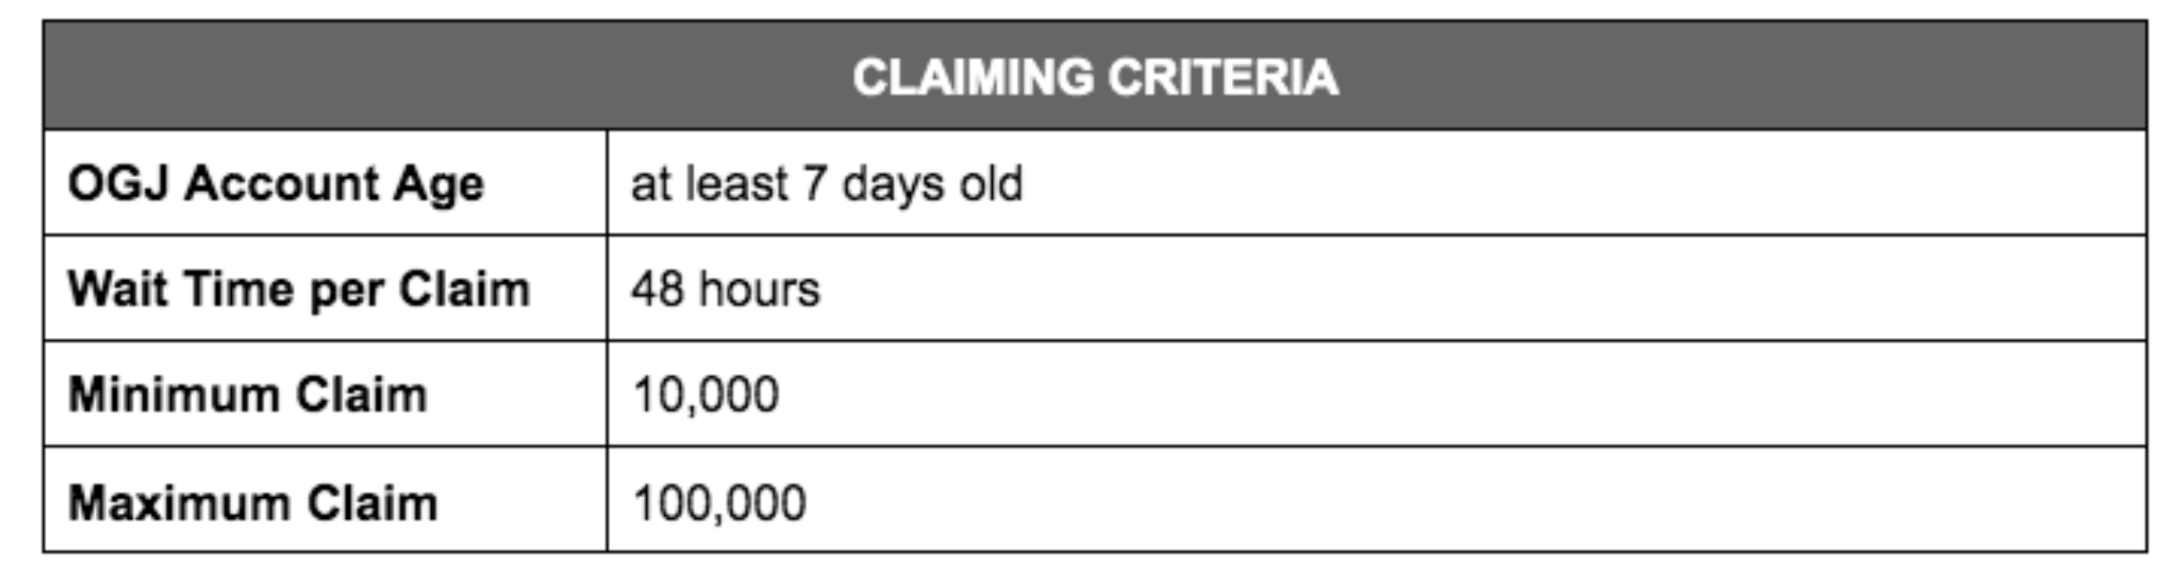 criteria_4_claiming.png